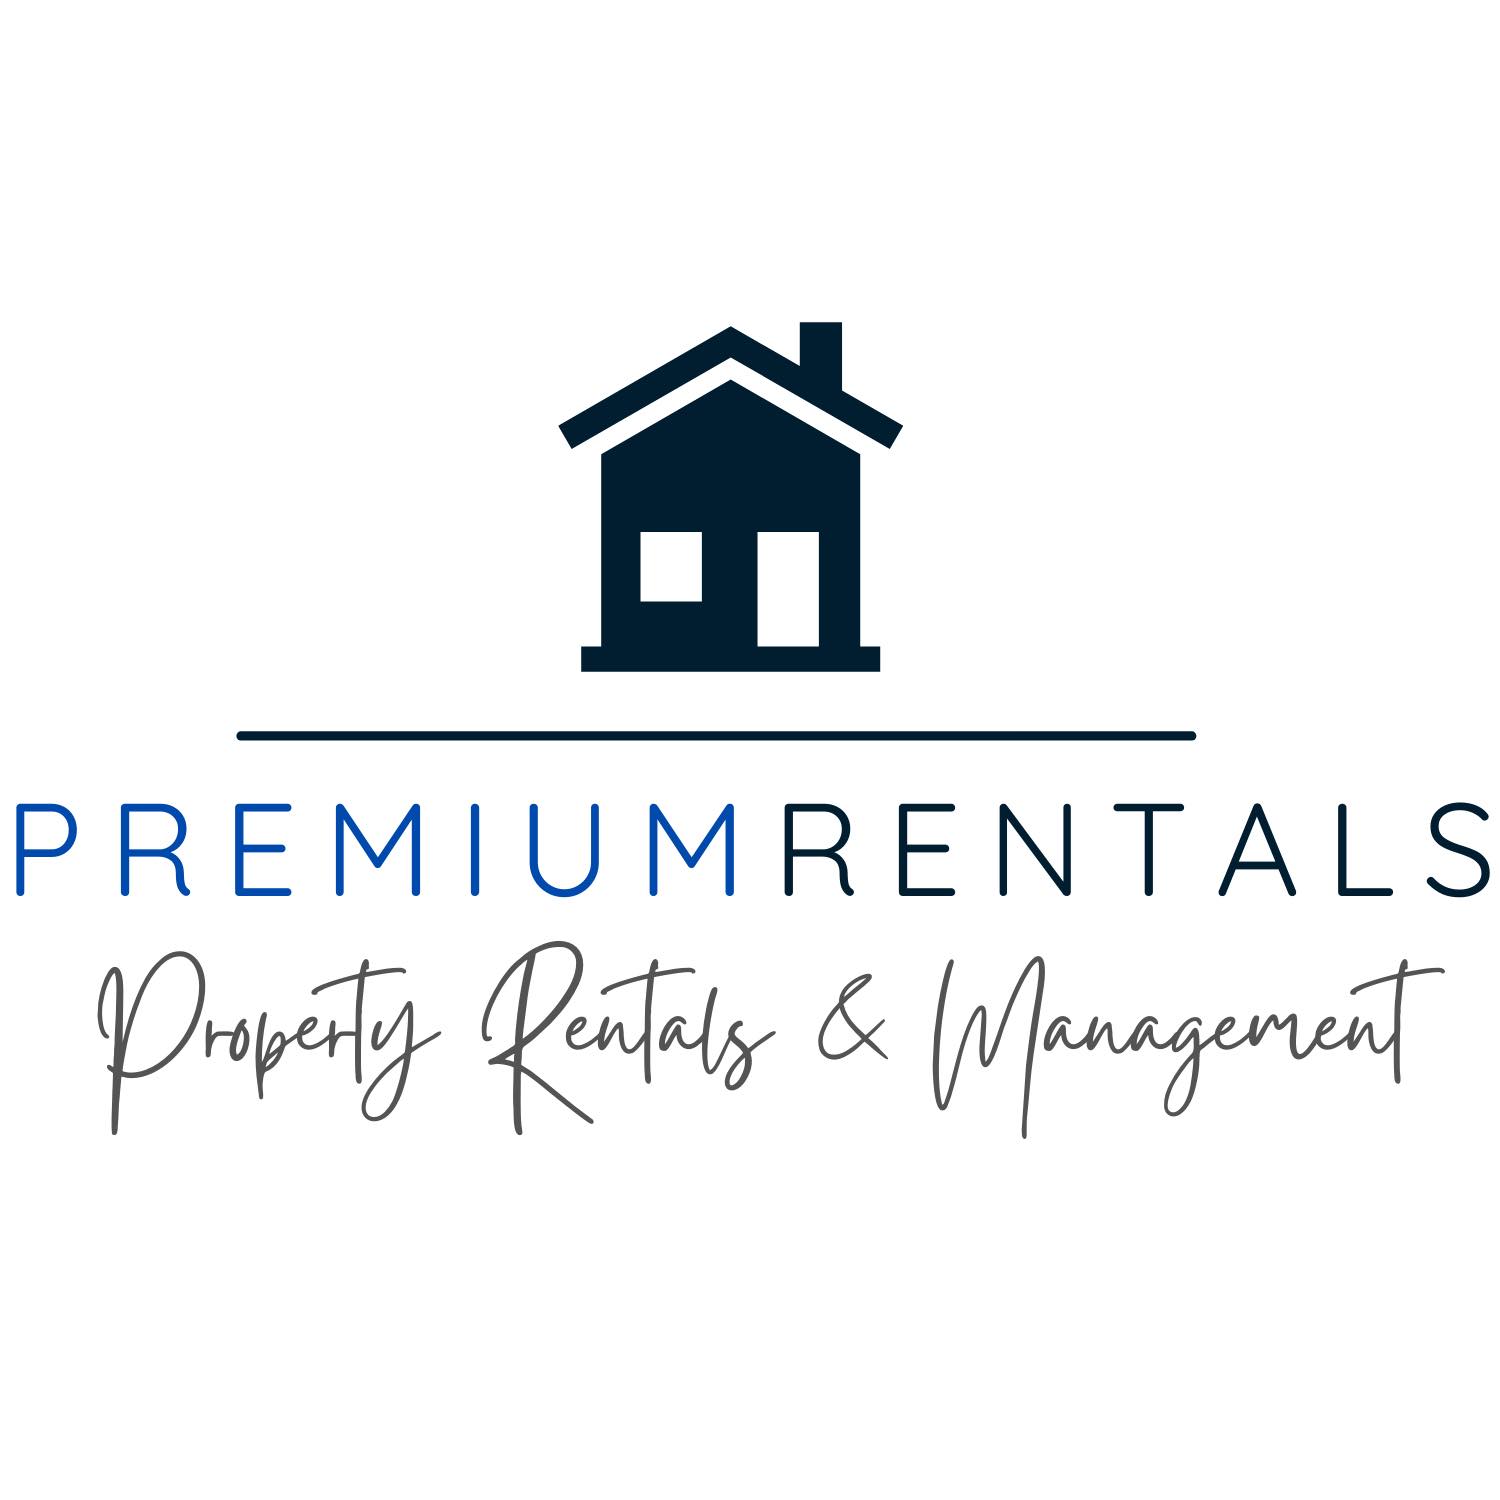 Premium Rentals - Property Rentals and Management throughout the Boise Area of Idaho and more...